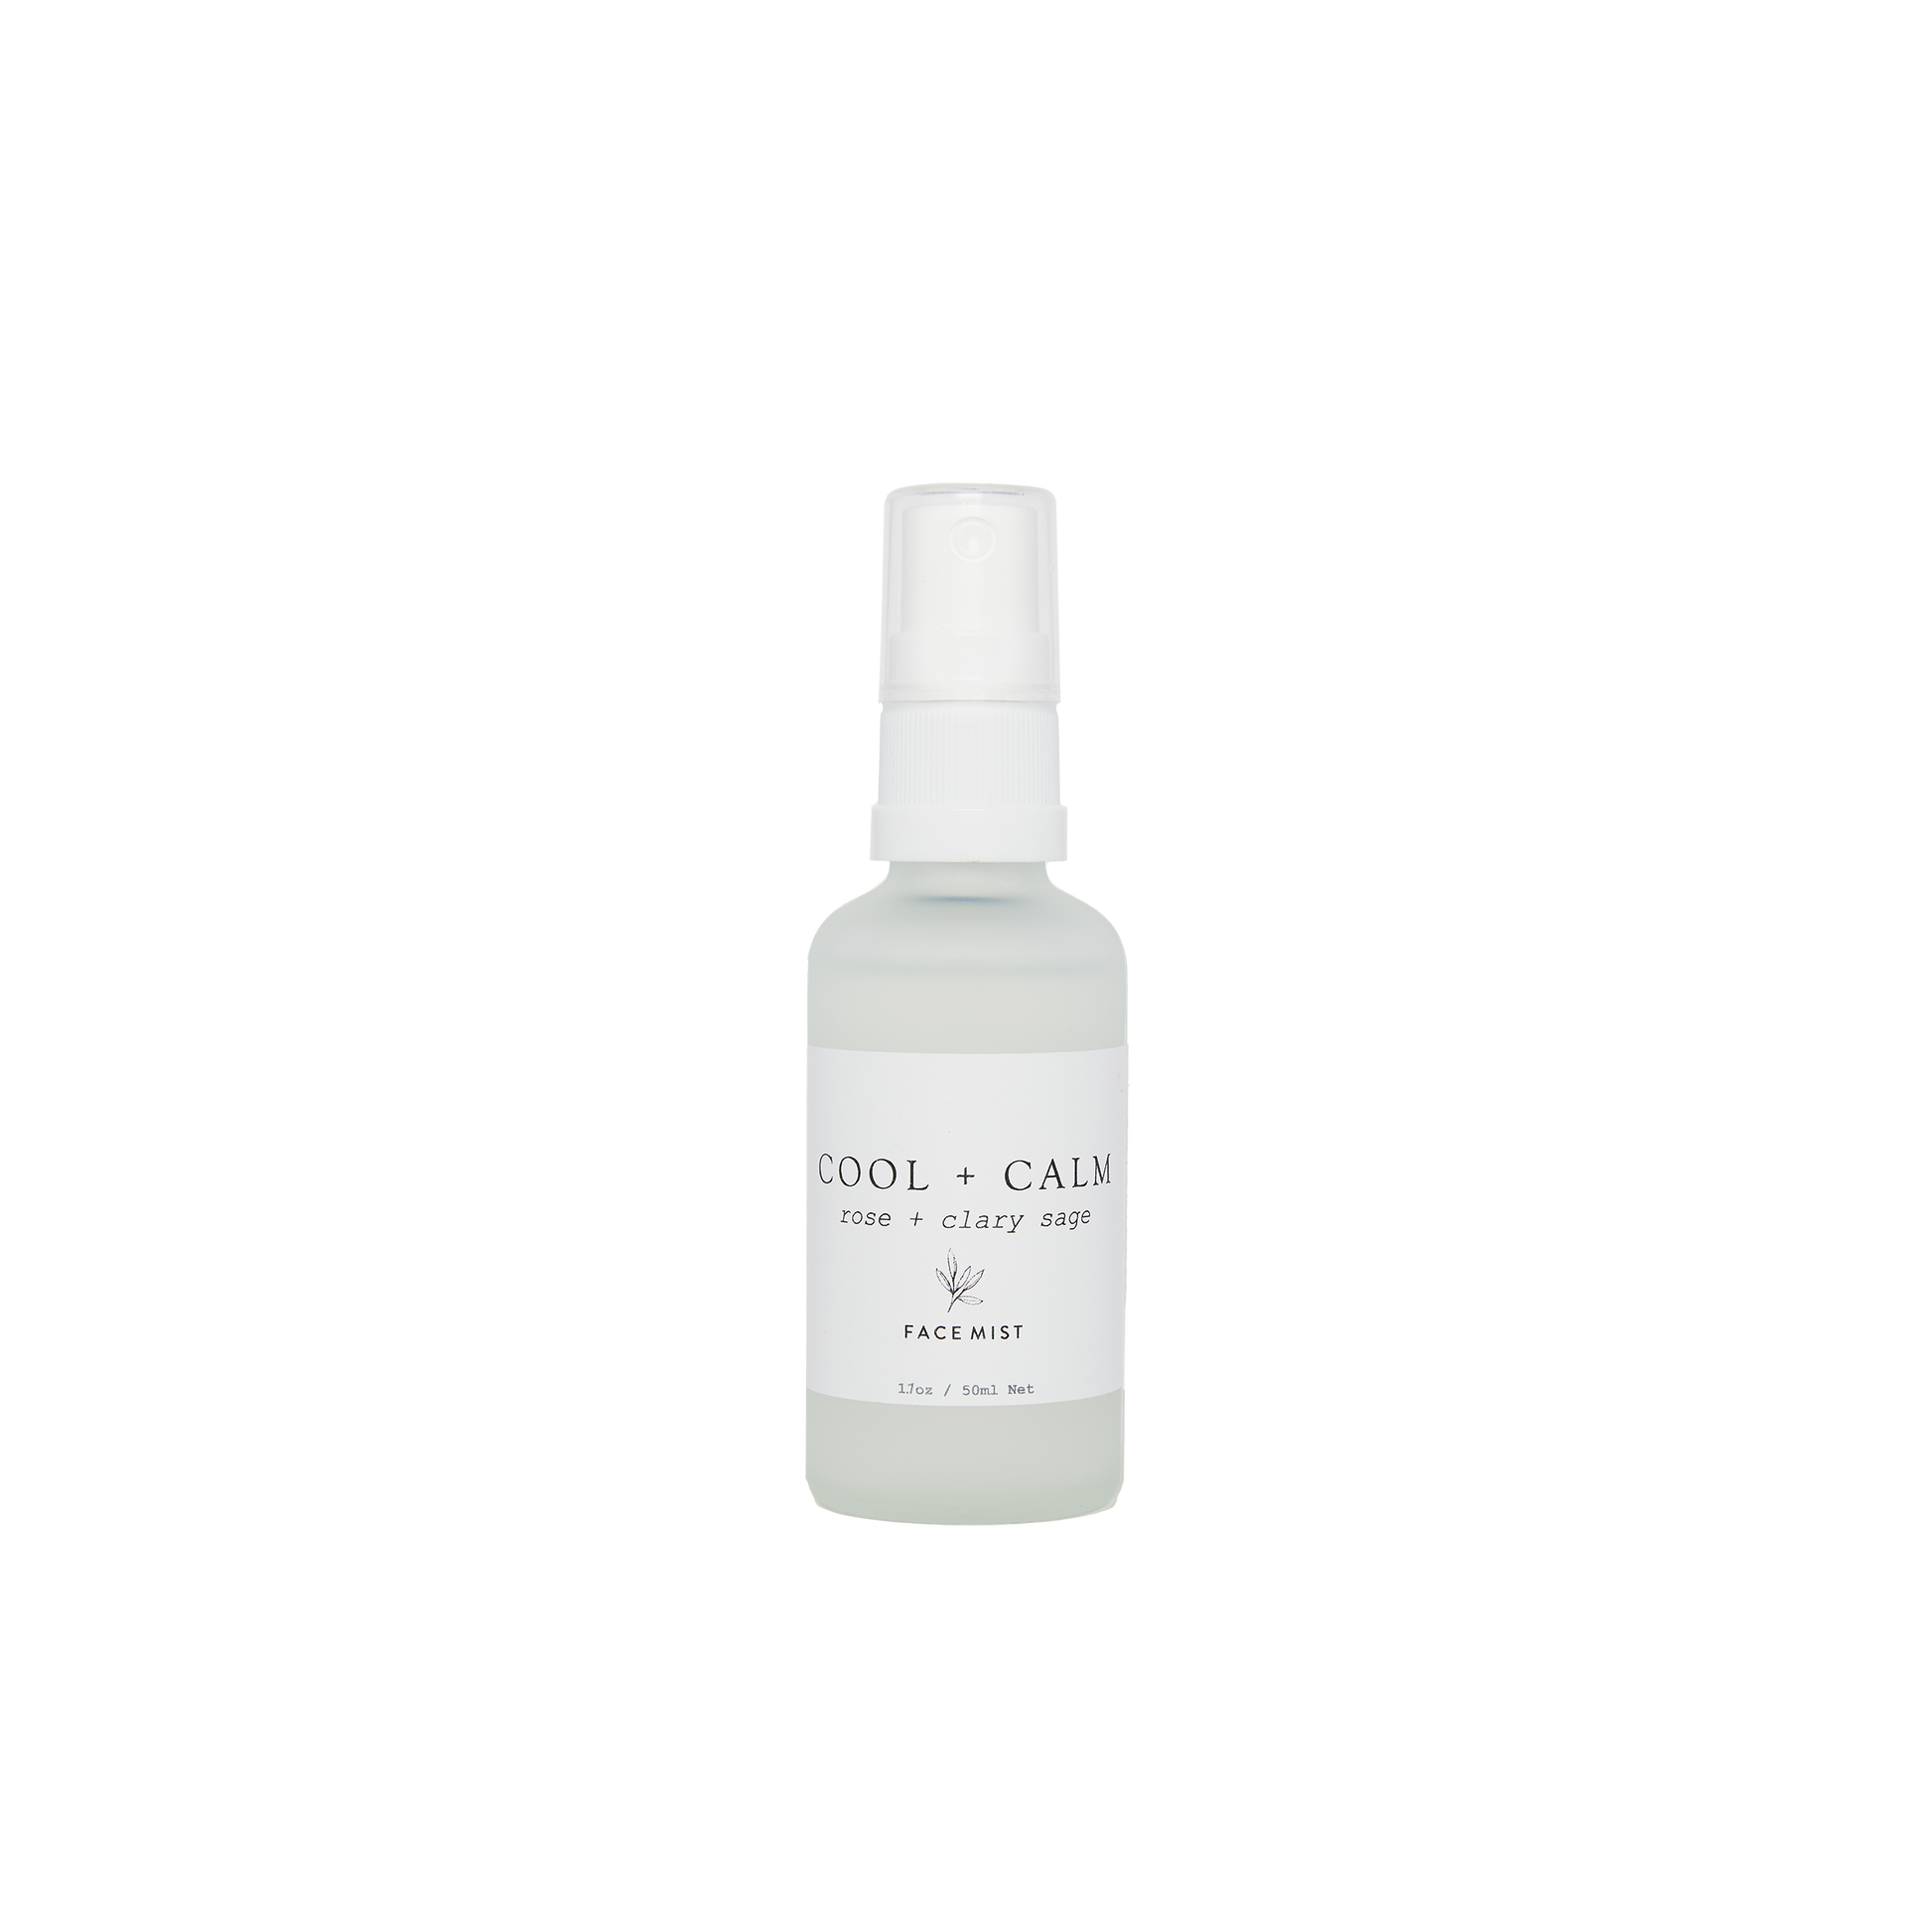 cool and calm rose water based mist for menopausal hot flushes and anxiety. In a frosted clear bottle with a white label and white pump